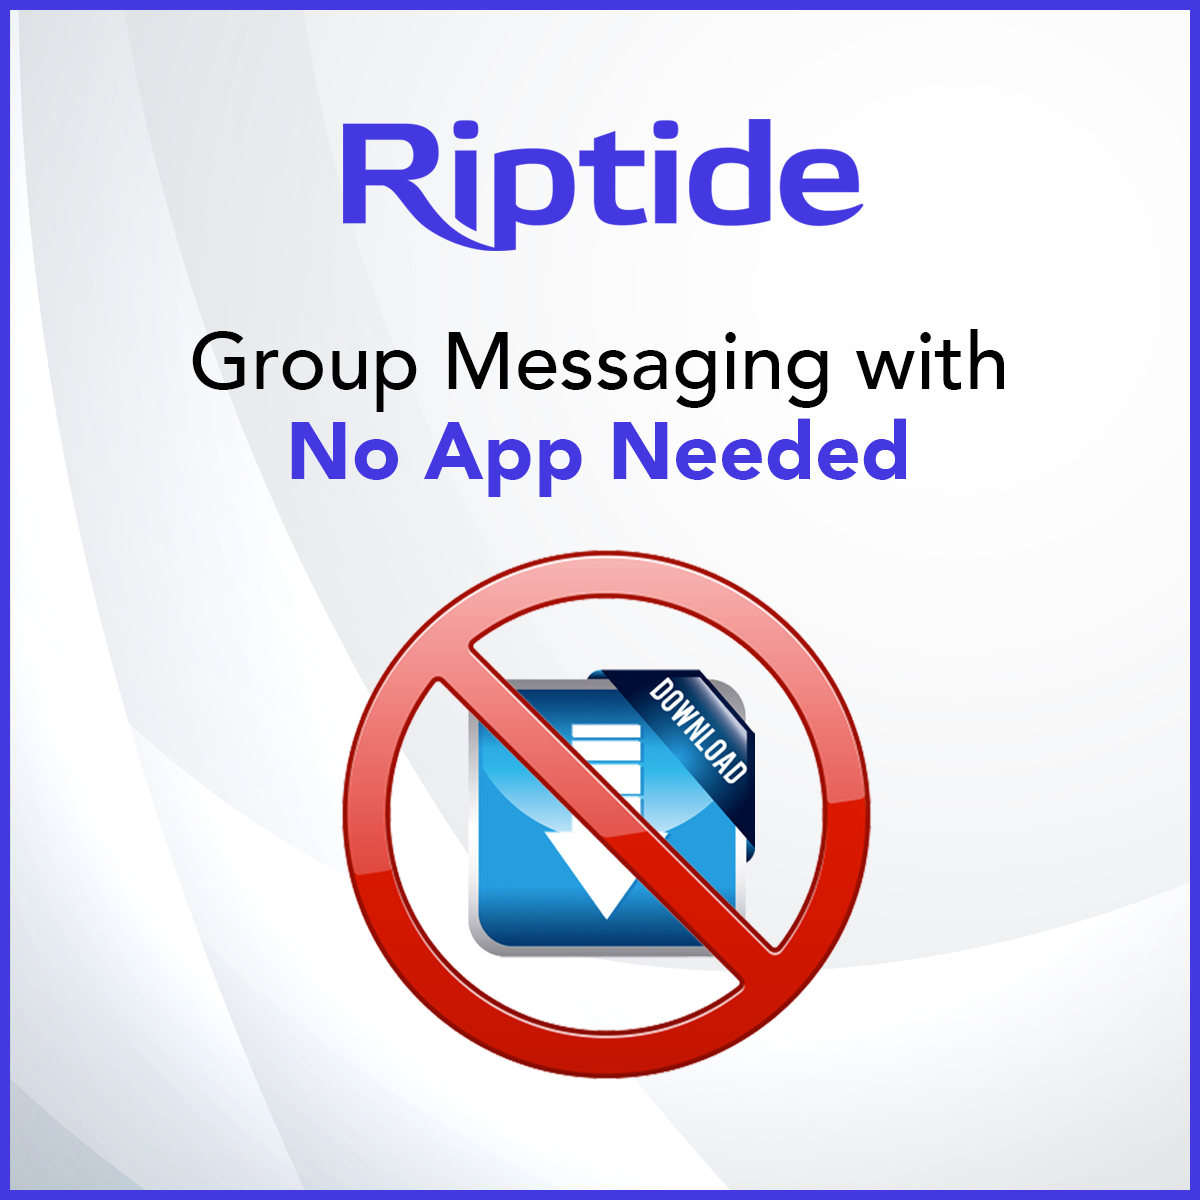 Did you know that Riptide connects Drivers, Dispatchers, Warehouses & Customers with just SMS text? 

No App Needed.

Learn how Riptide can enhance your #logistics communication here: riptidehq.com

#logisticstech #lastmile #middlemile #freight